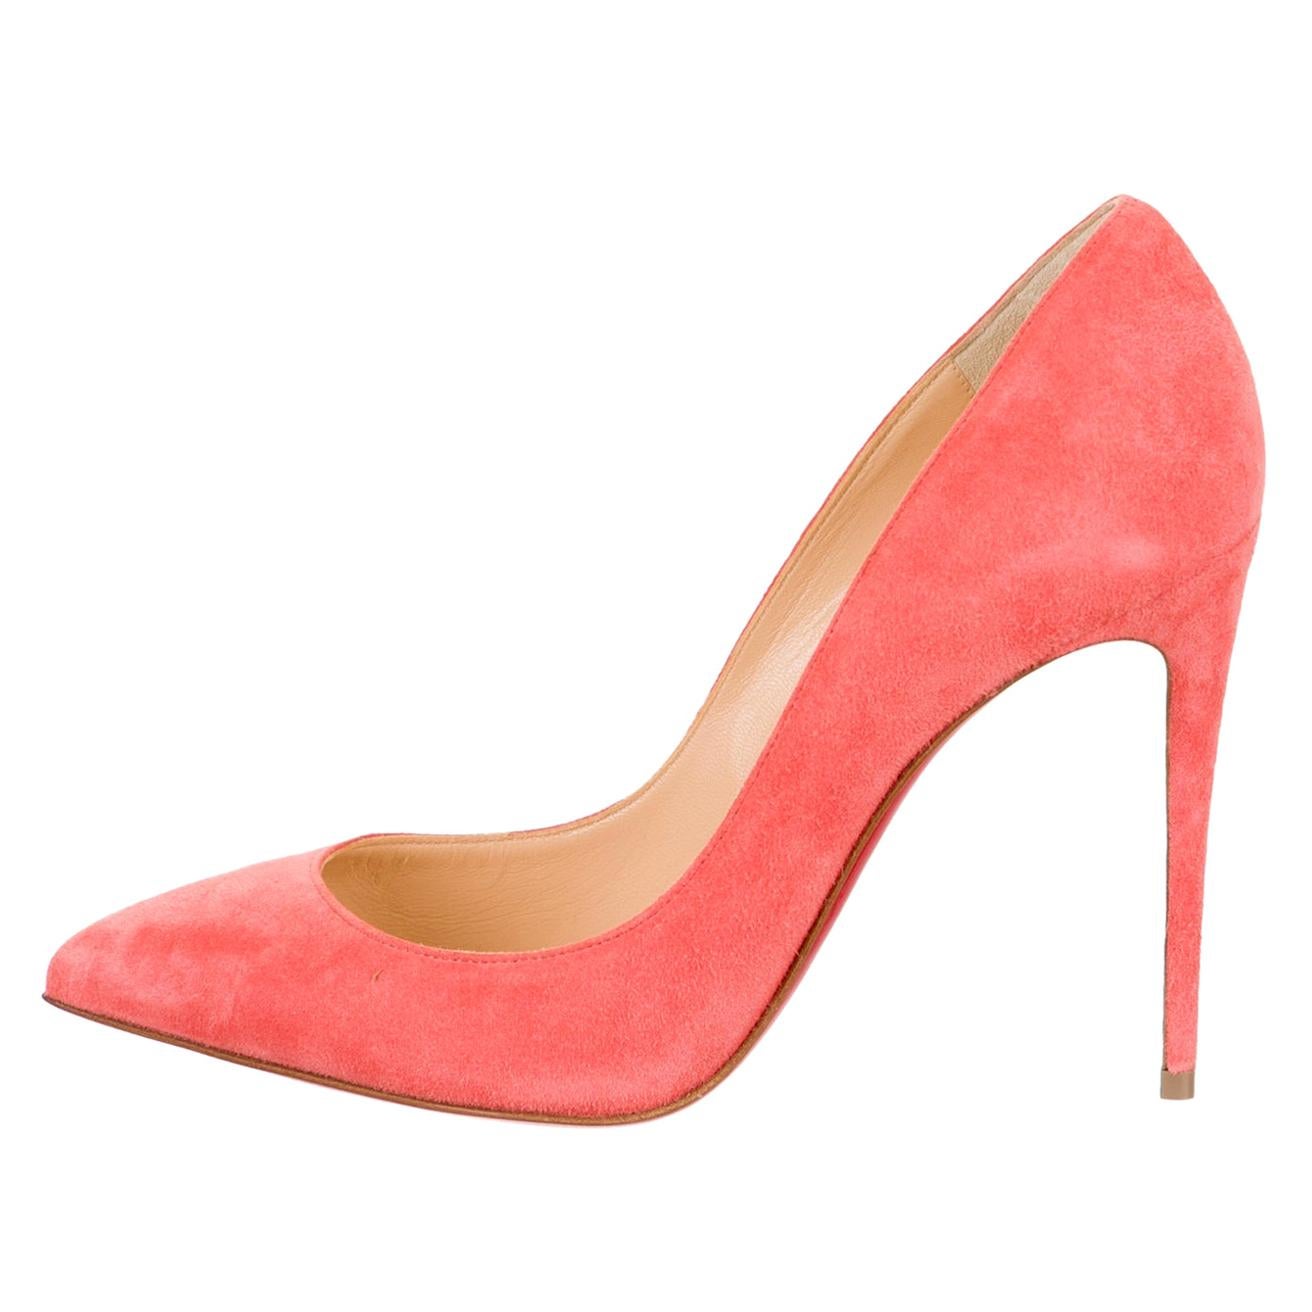 Christian Louboutin NEW Coral Suede Leather Pumps Heels in Box